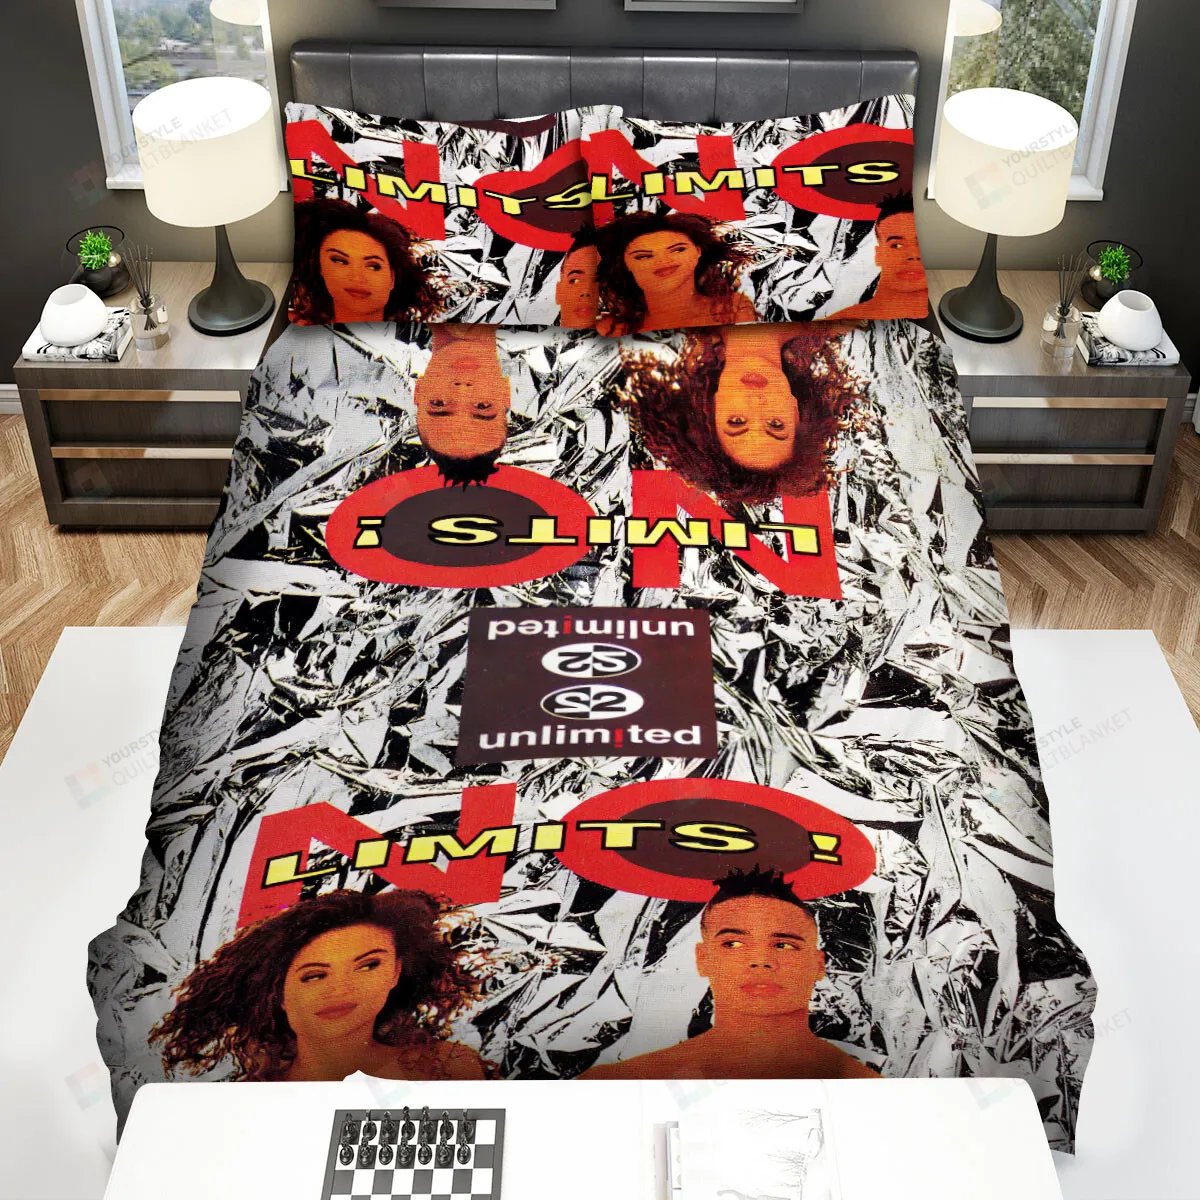 2 Unlimited Slipped Bed Sheets Spread Comforter Duvet Cover Bedding Sets